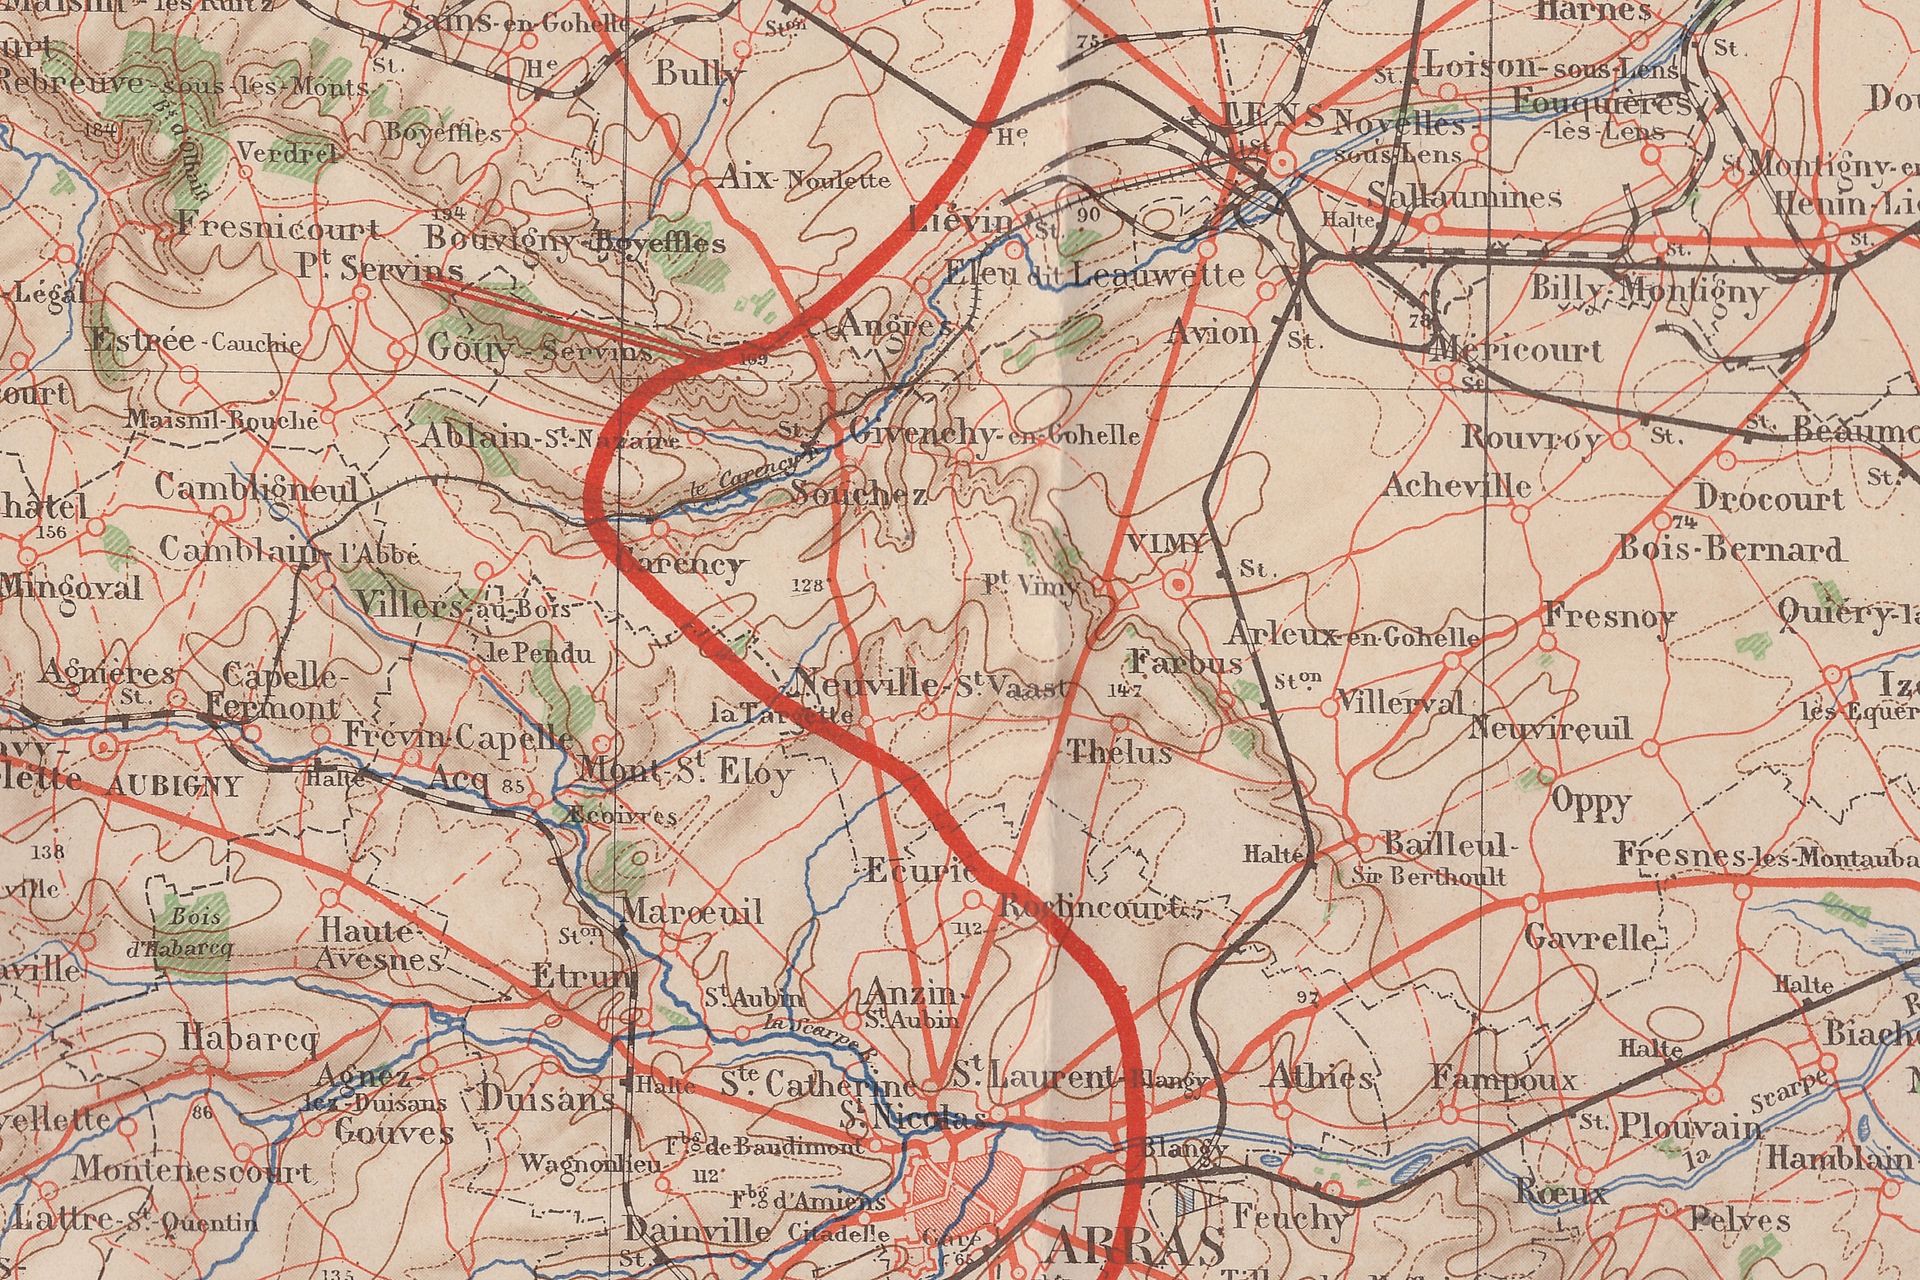 Artois Front in Early 1915